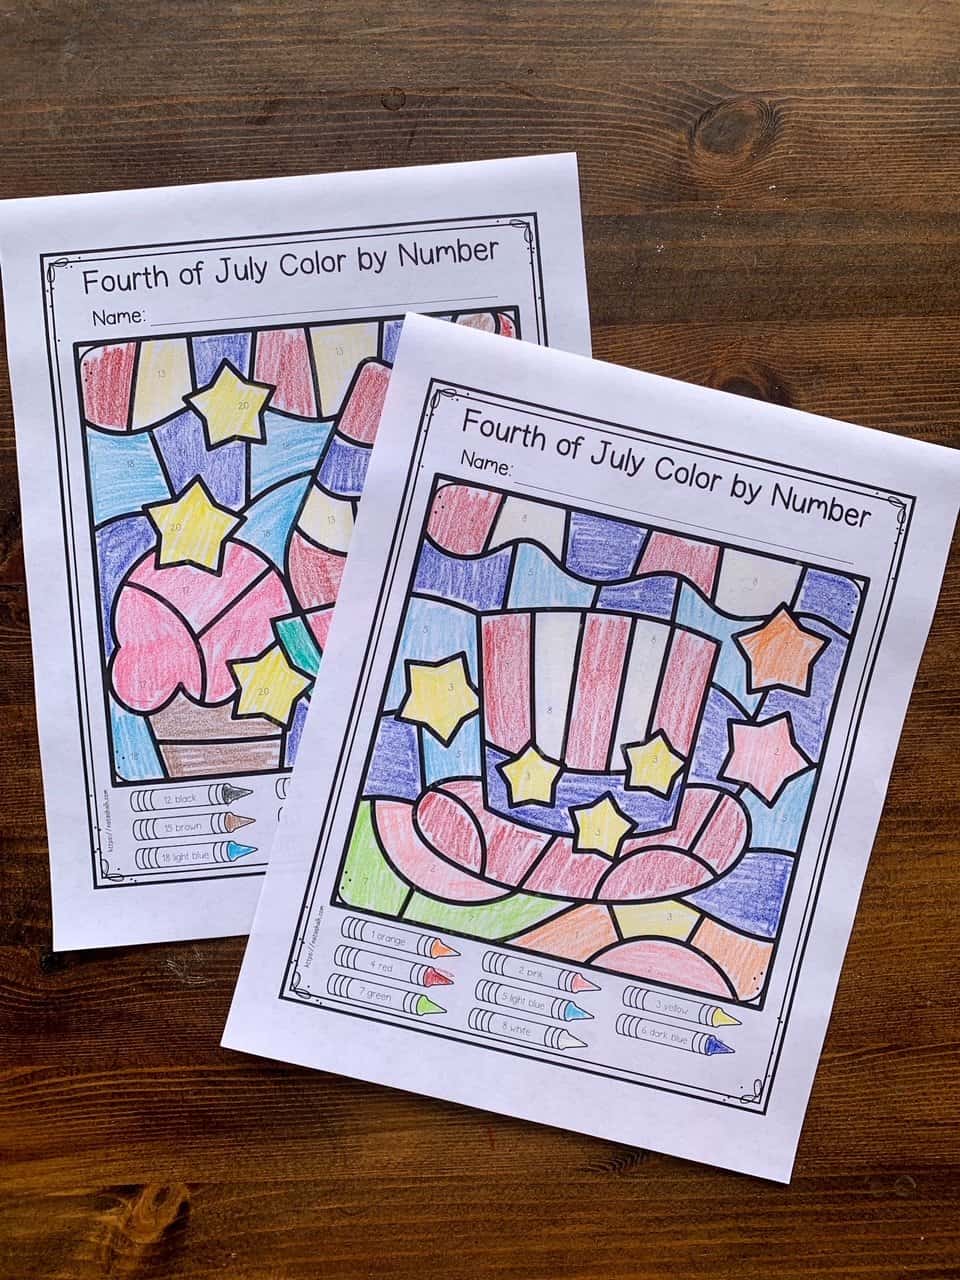 A photograph of two completed Fourth of July color by number pages for kids